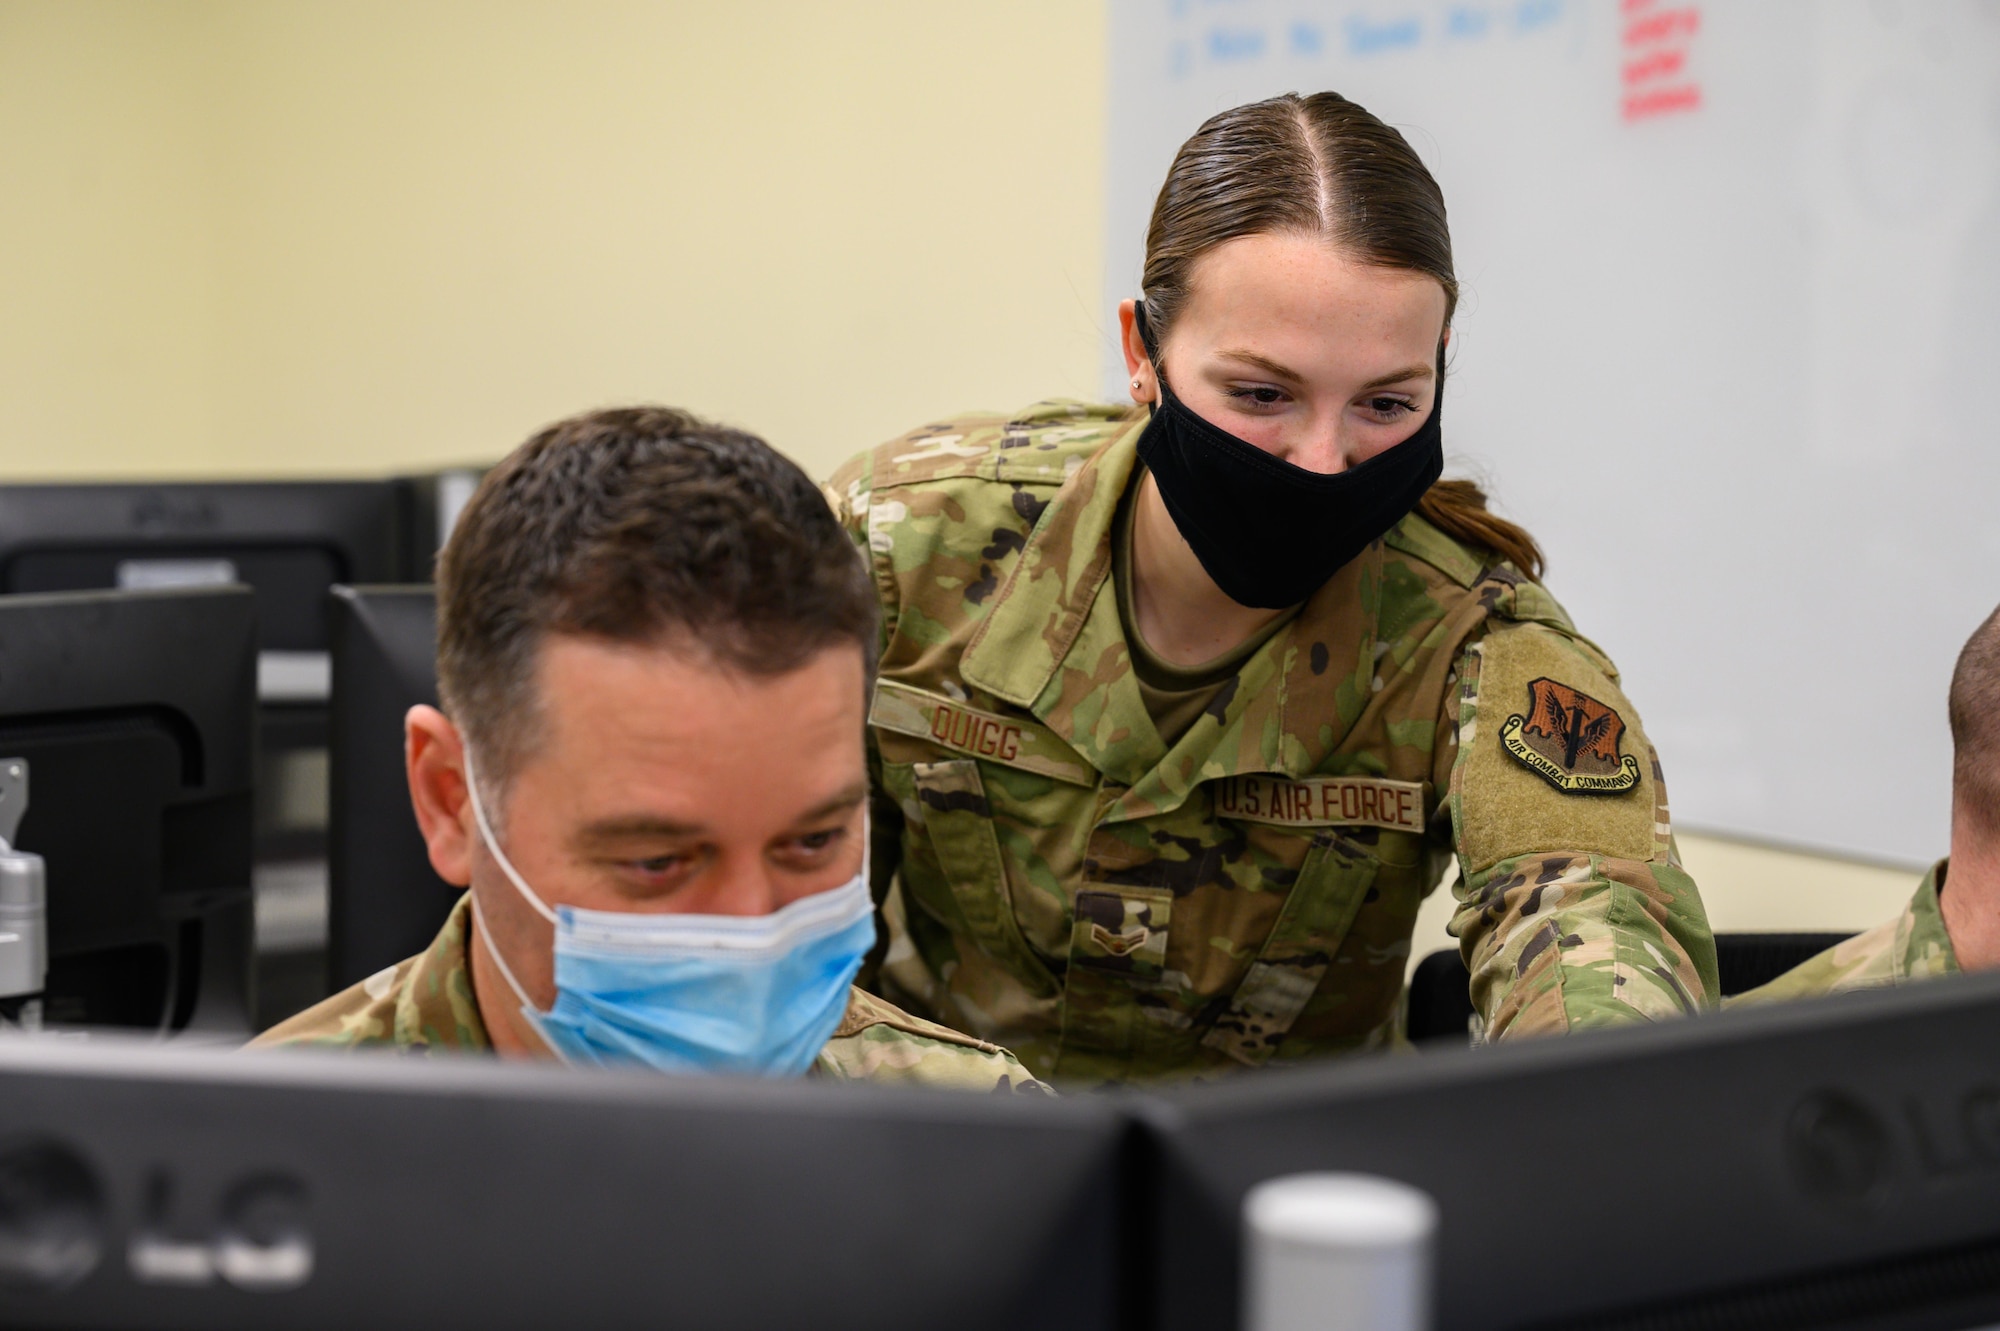 (From left) Tech Sgt. Jonathan Digges, a cyber systems operator for the 135th Intelligence Squadron, Maryland Air National Guard, works on a computer with Airman 1st Class Elizabeth Quigg, a fusion analyst for the 135th IS, MDANG, on Feb. 12, 2022, at Warfield Air National Guard Base at Martin State Airport, Middle River, Maryland.  (U.S. Air National Guard photo by Staff Sgt. Sarah M. McClanahan)